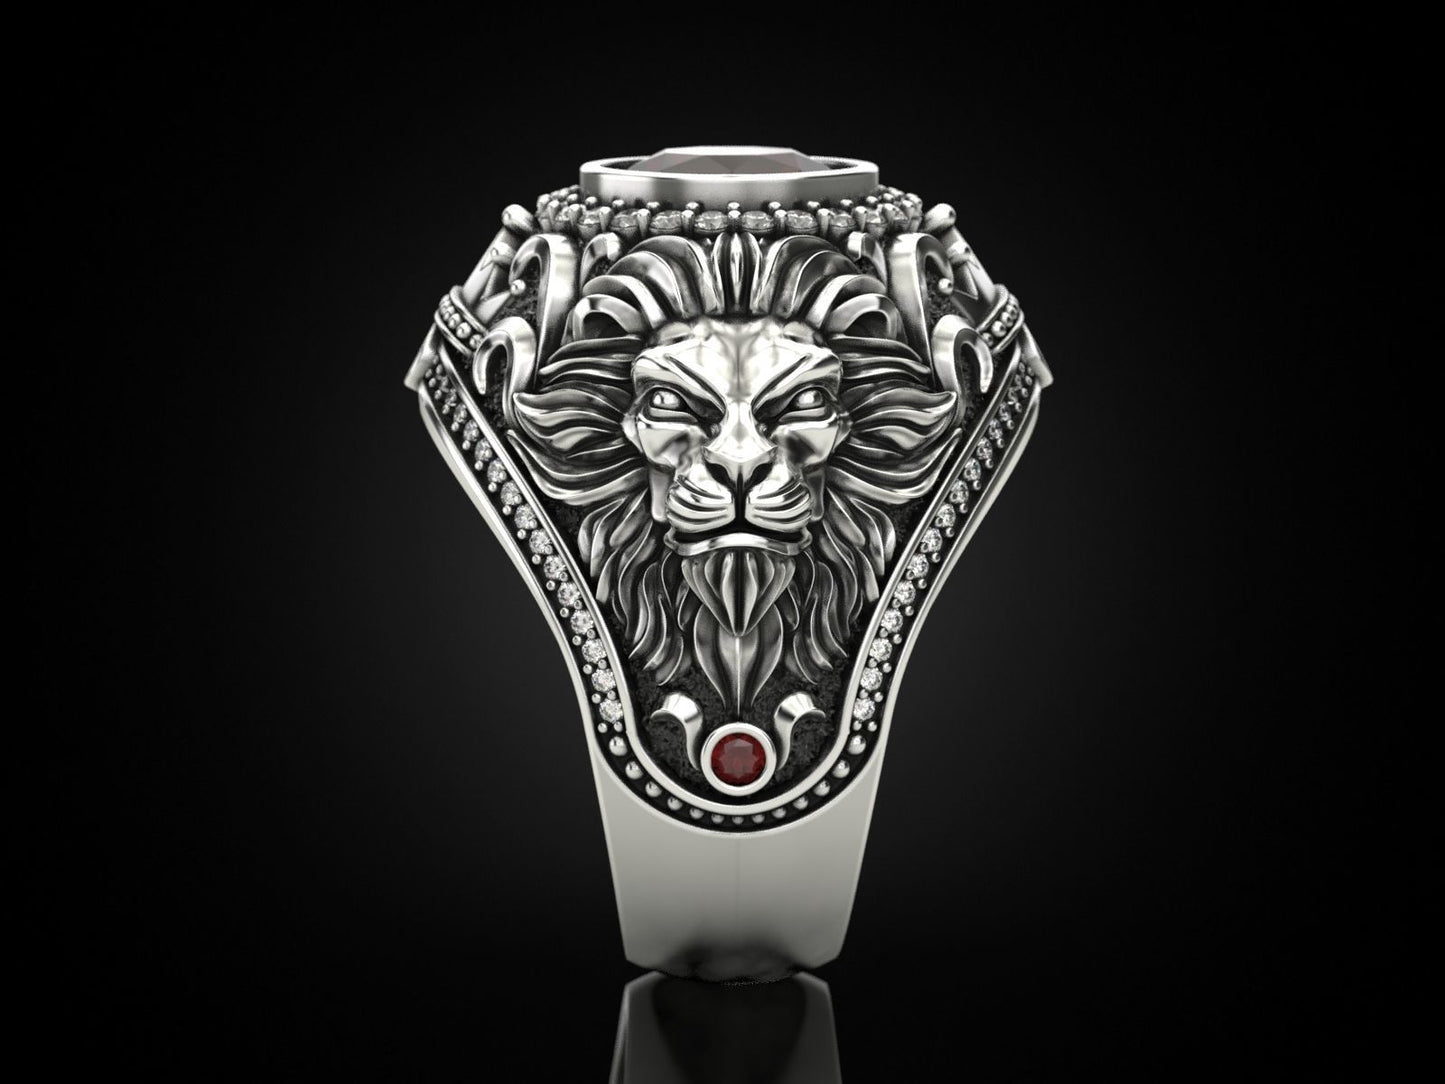 RARE PRINCE by CARAT SUTRA | Unique Designed Double Faced Lion Ring with Red Zircon Stone | 925 Sterling Silver Oxidized Ring | Men's Jewelry | With Certificate of Authenticity and 925 Hallmark